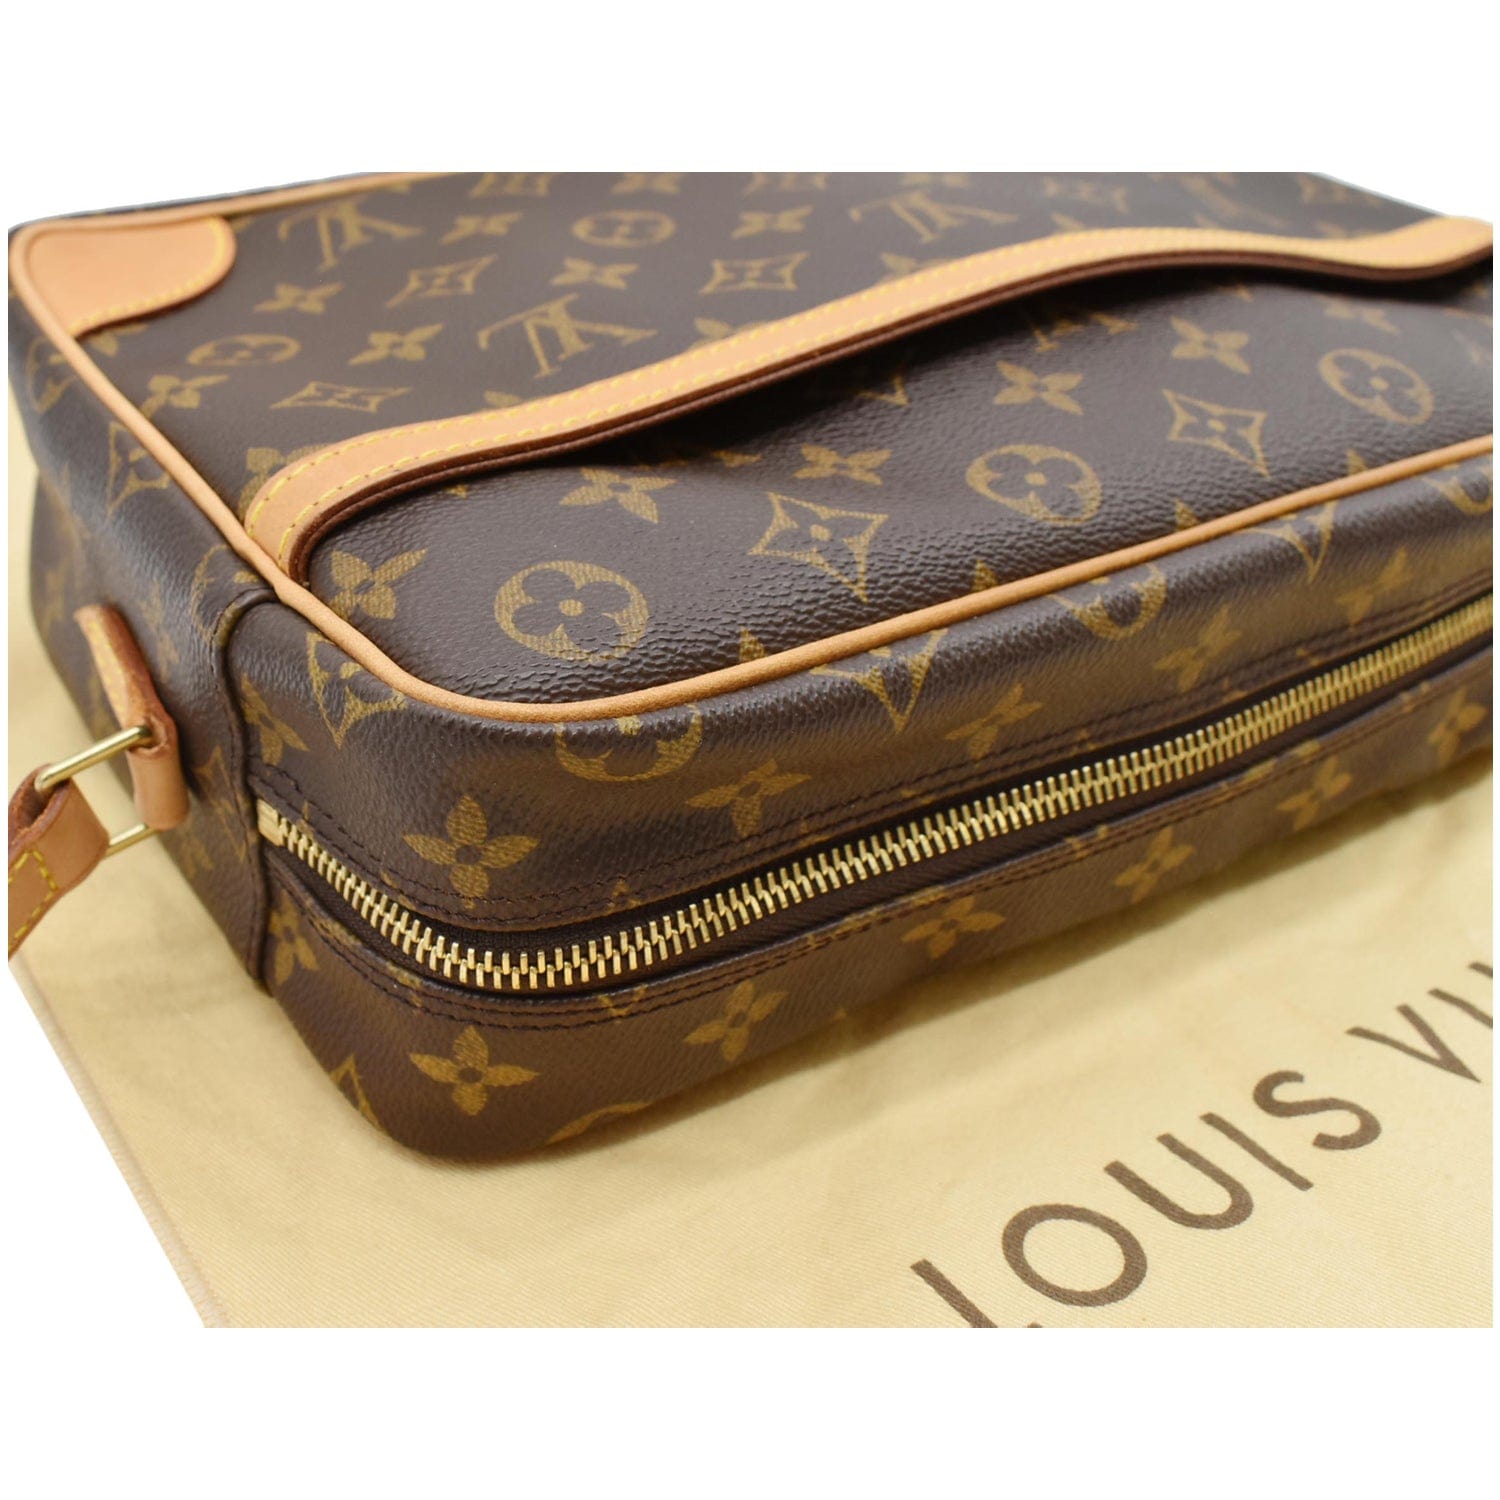 Vintage Louis Vuitton Trocadero Bag With Monogram From the Year